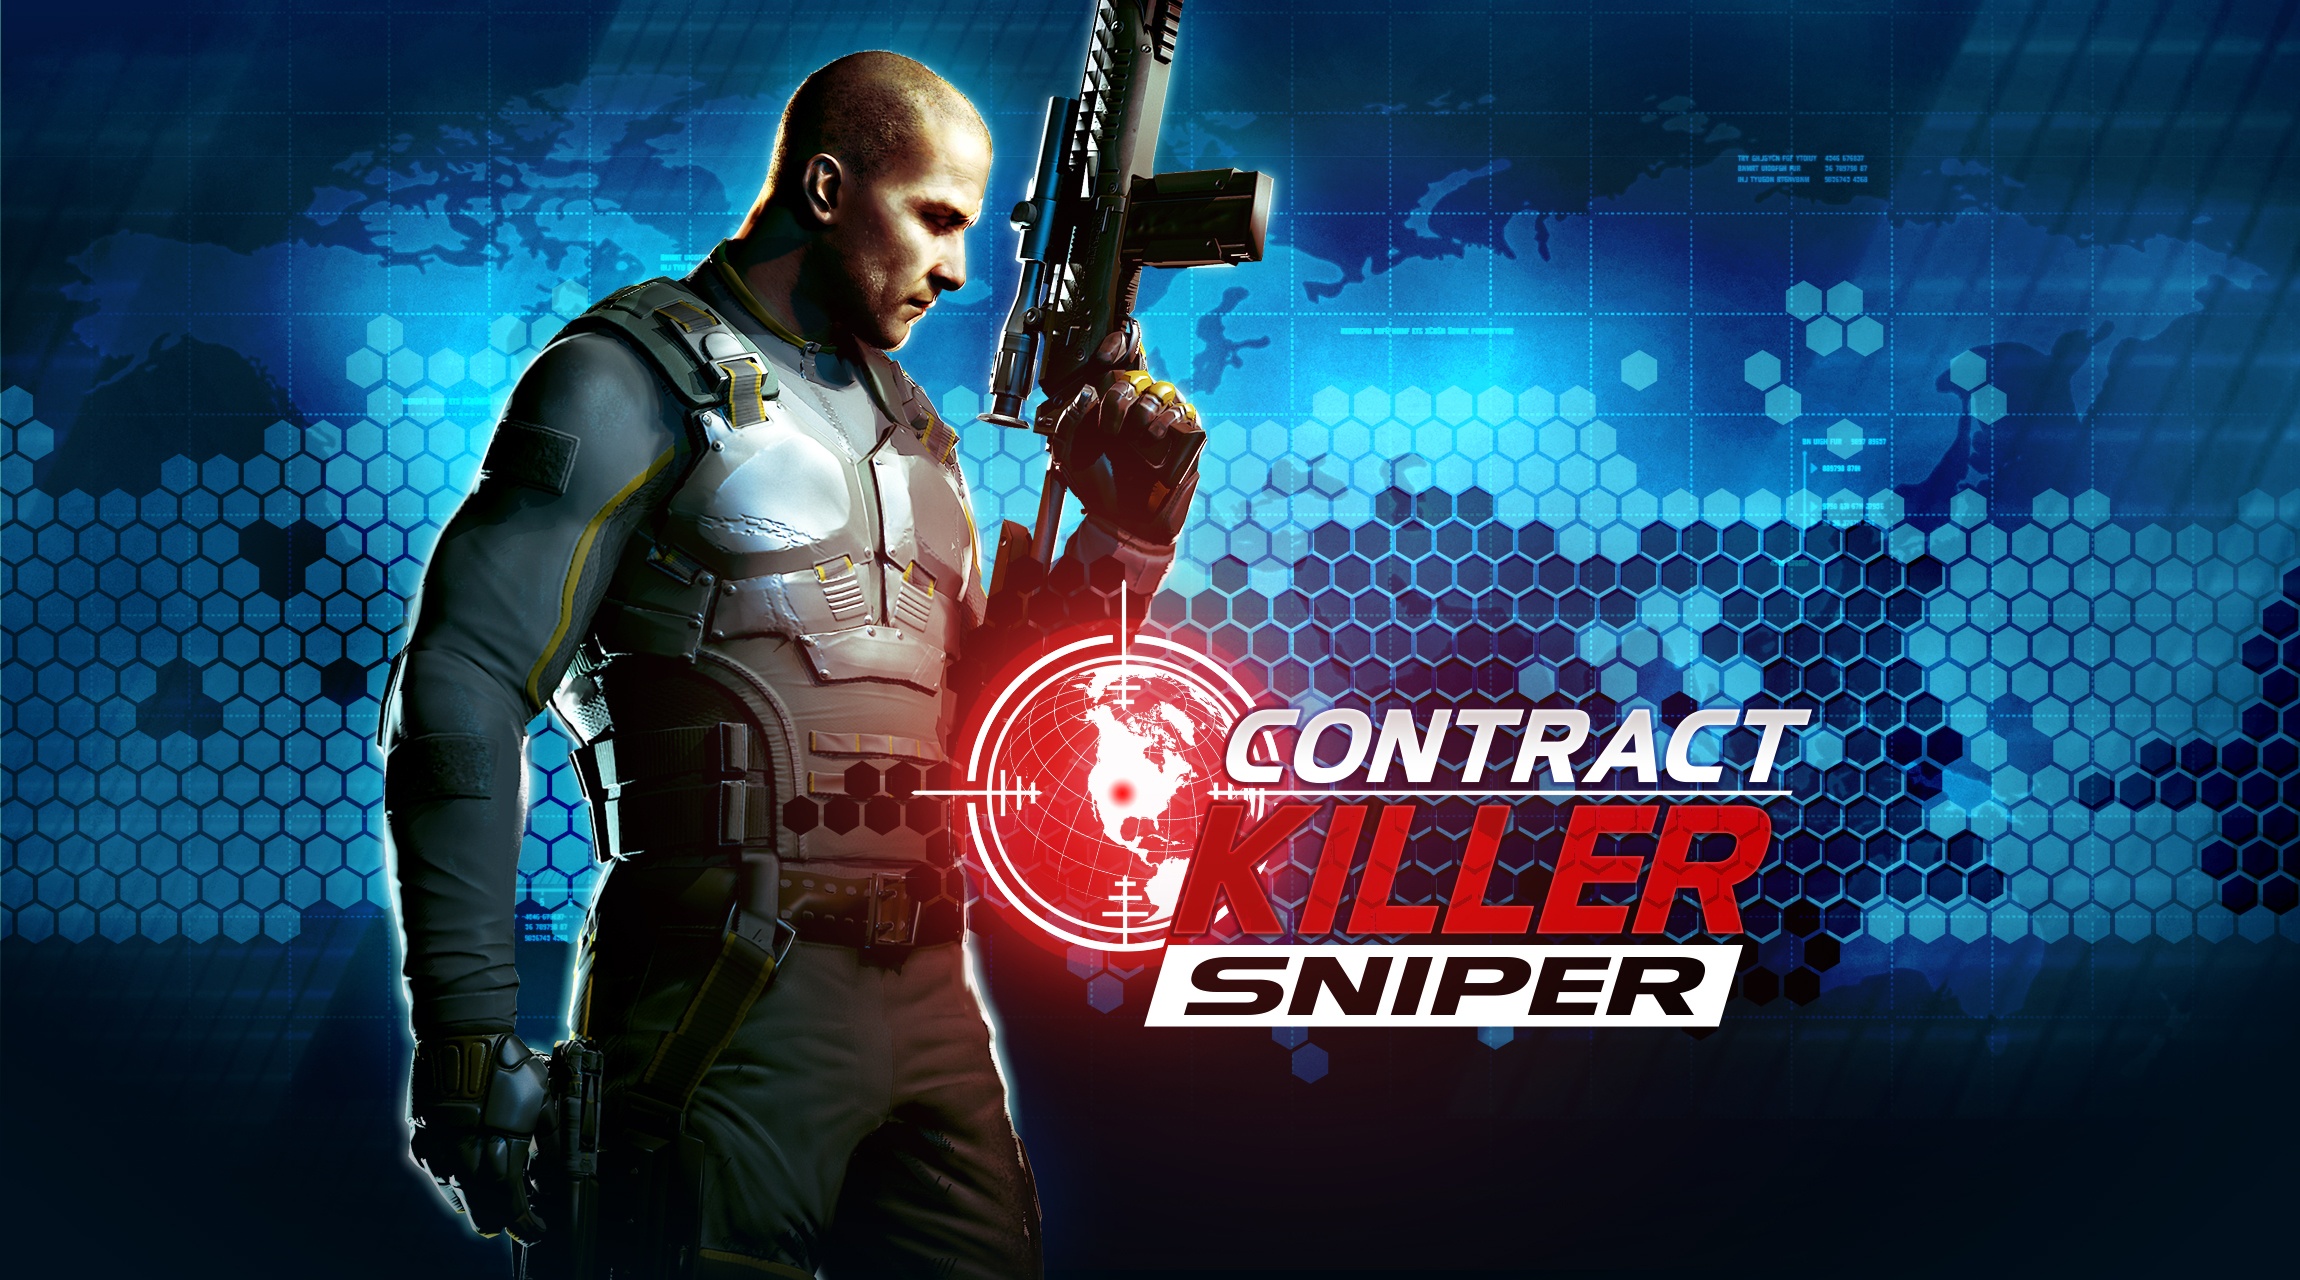 Glu Releases ‘Contract Killer: Sniper’ This Week